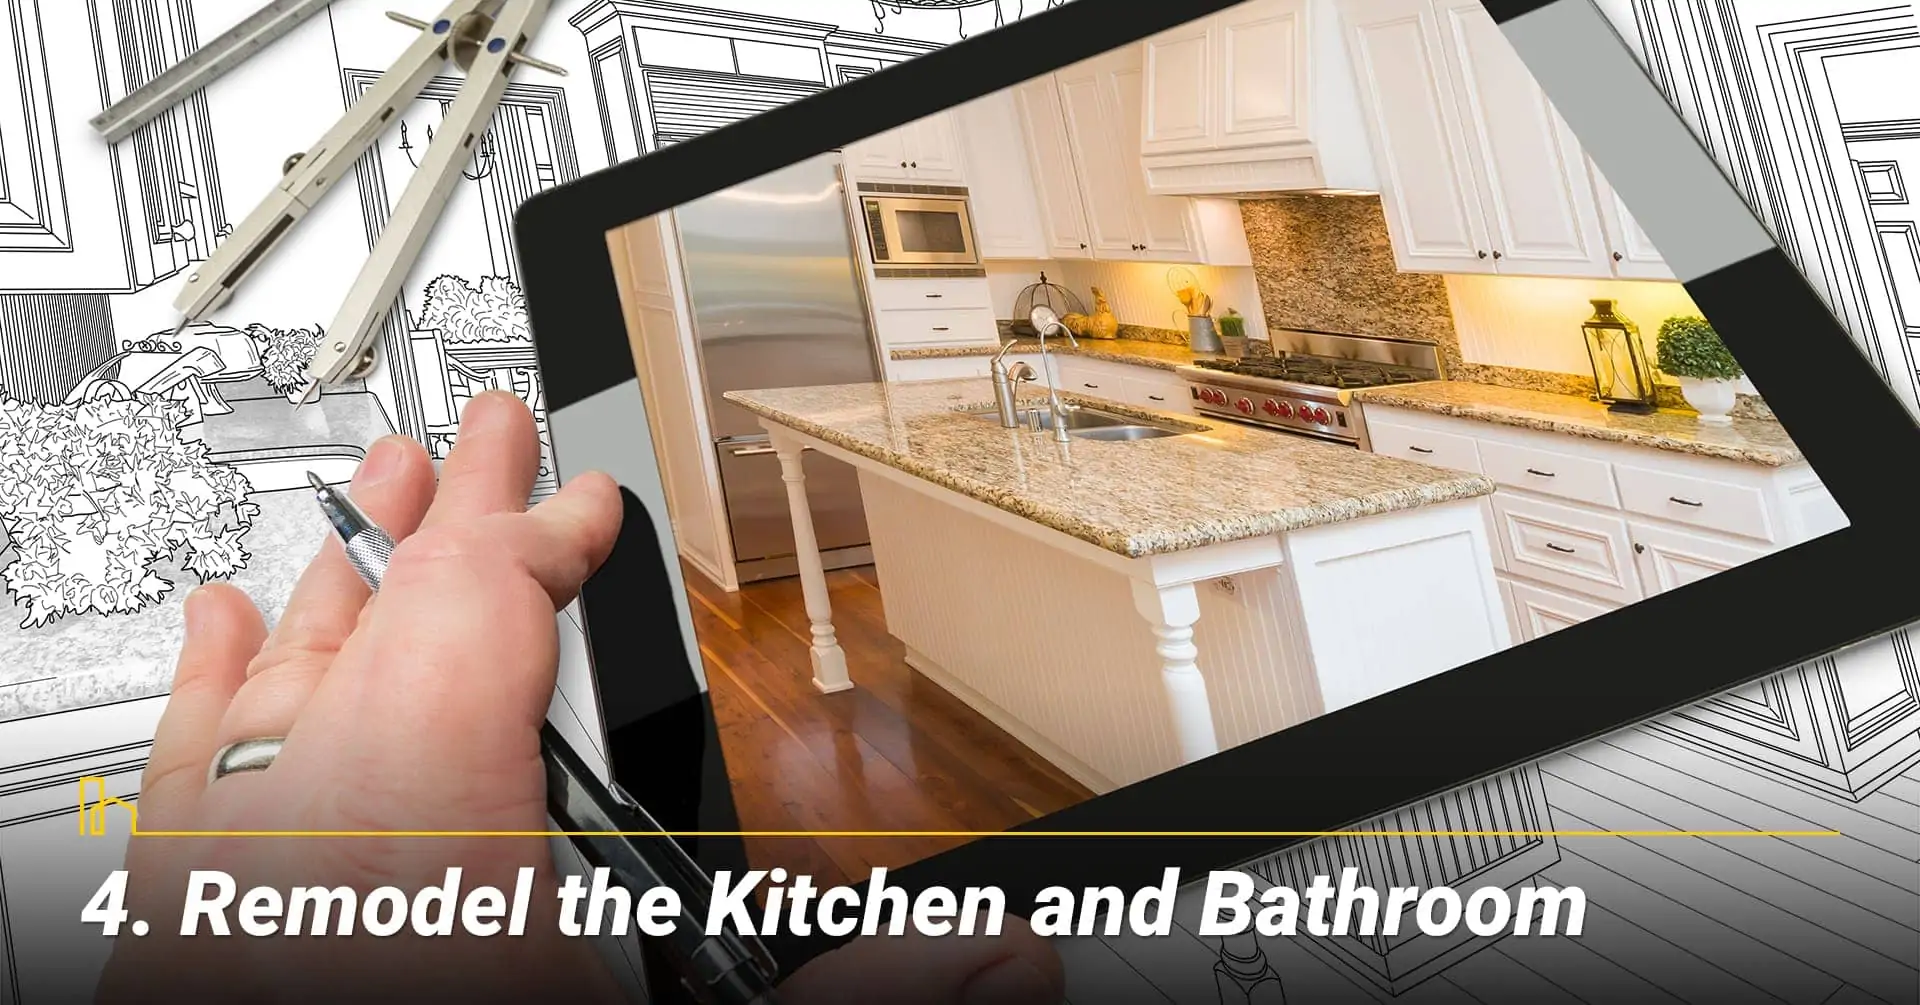 Remodel the Kitchen and Bathroom, upgrade your kitchen and bathroom